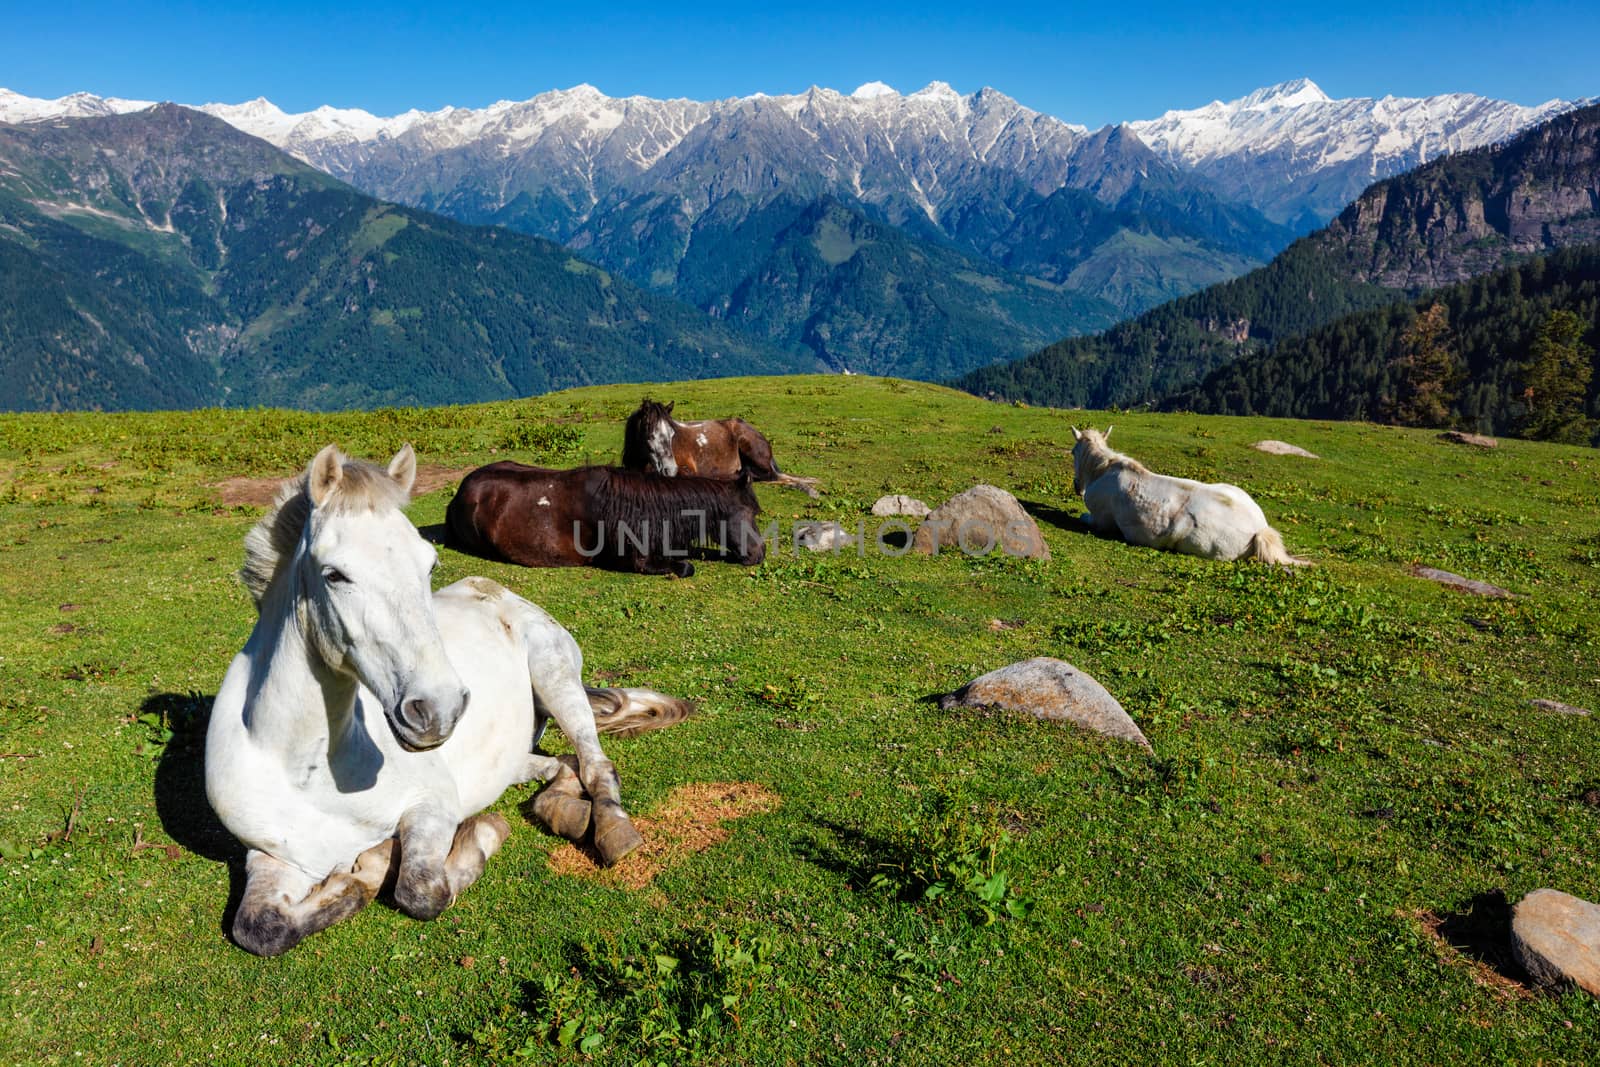 Horses in mountains. Himachal Pradesh, India by dimol